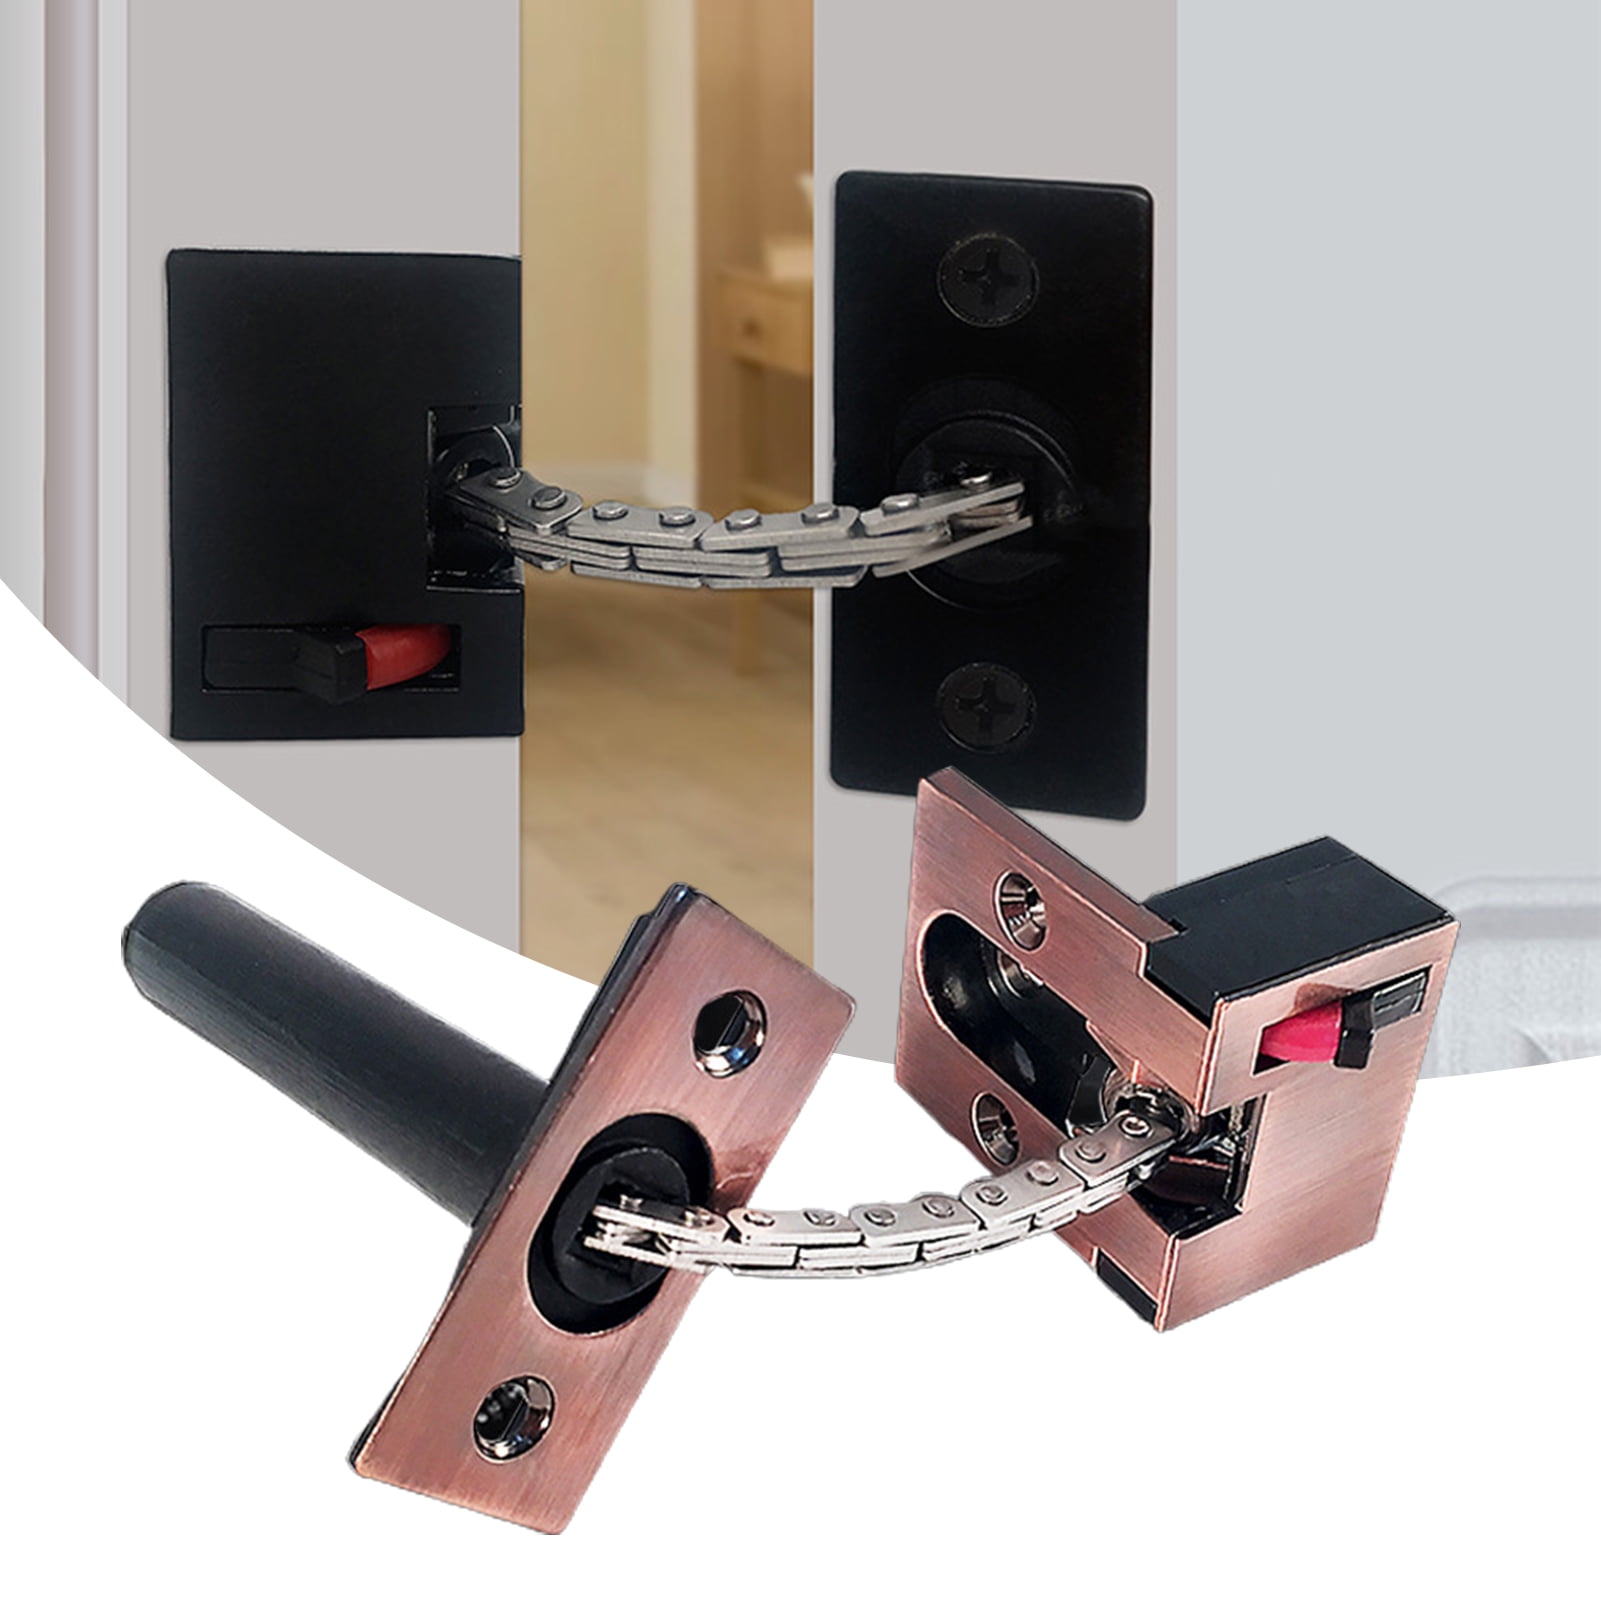 Stainless Steel Anti-theft Chain Lock Security Inside Home Door press Lock Catch 